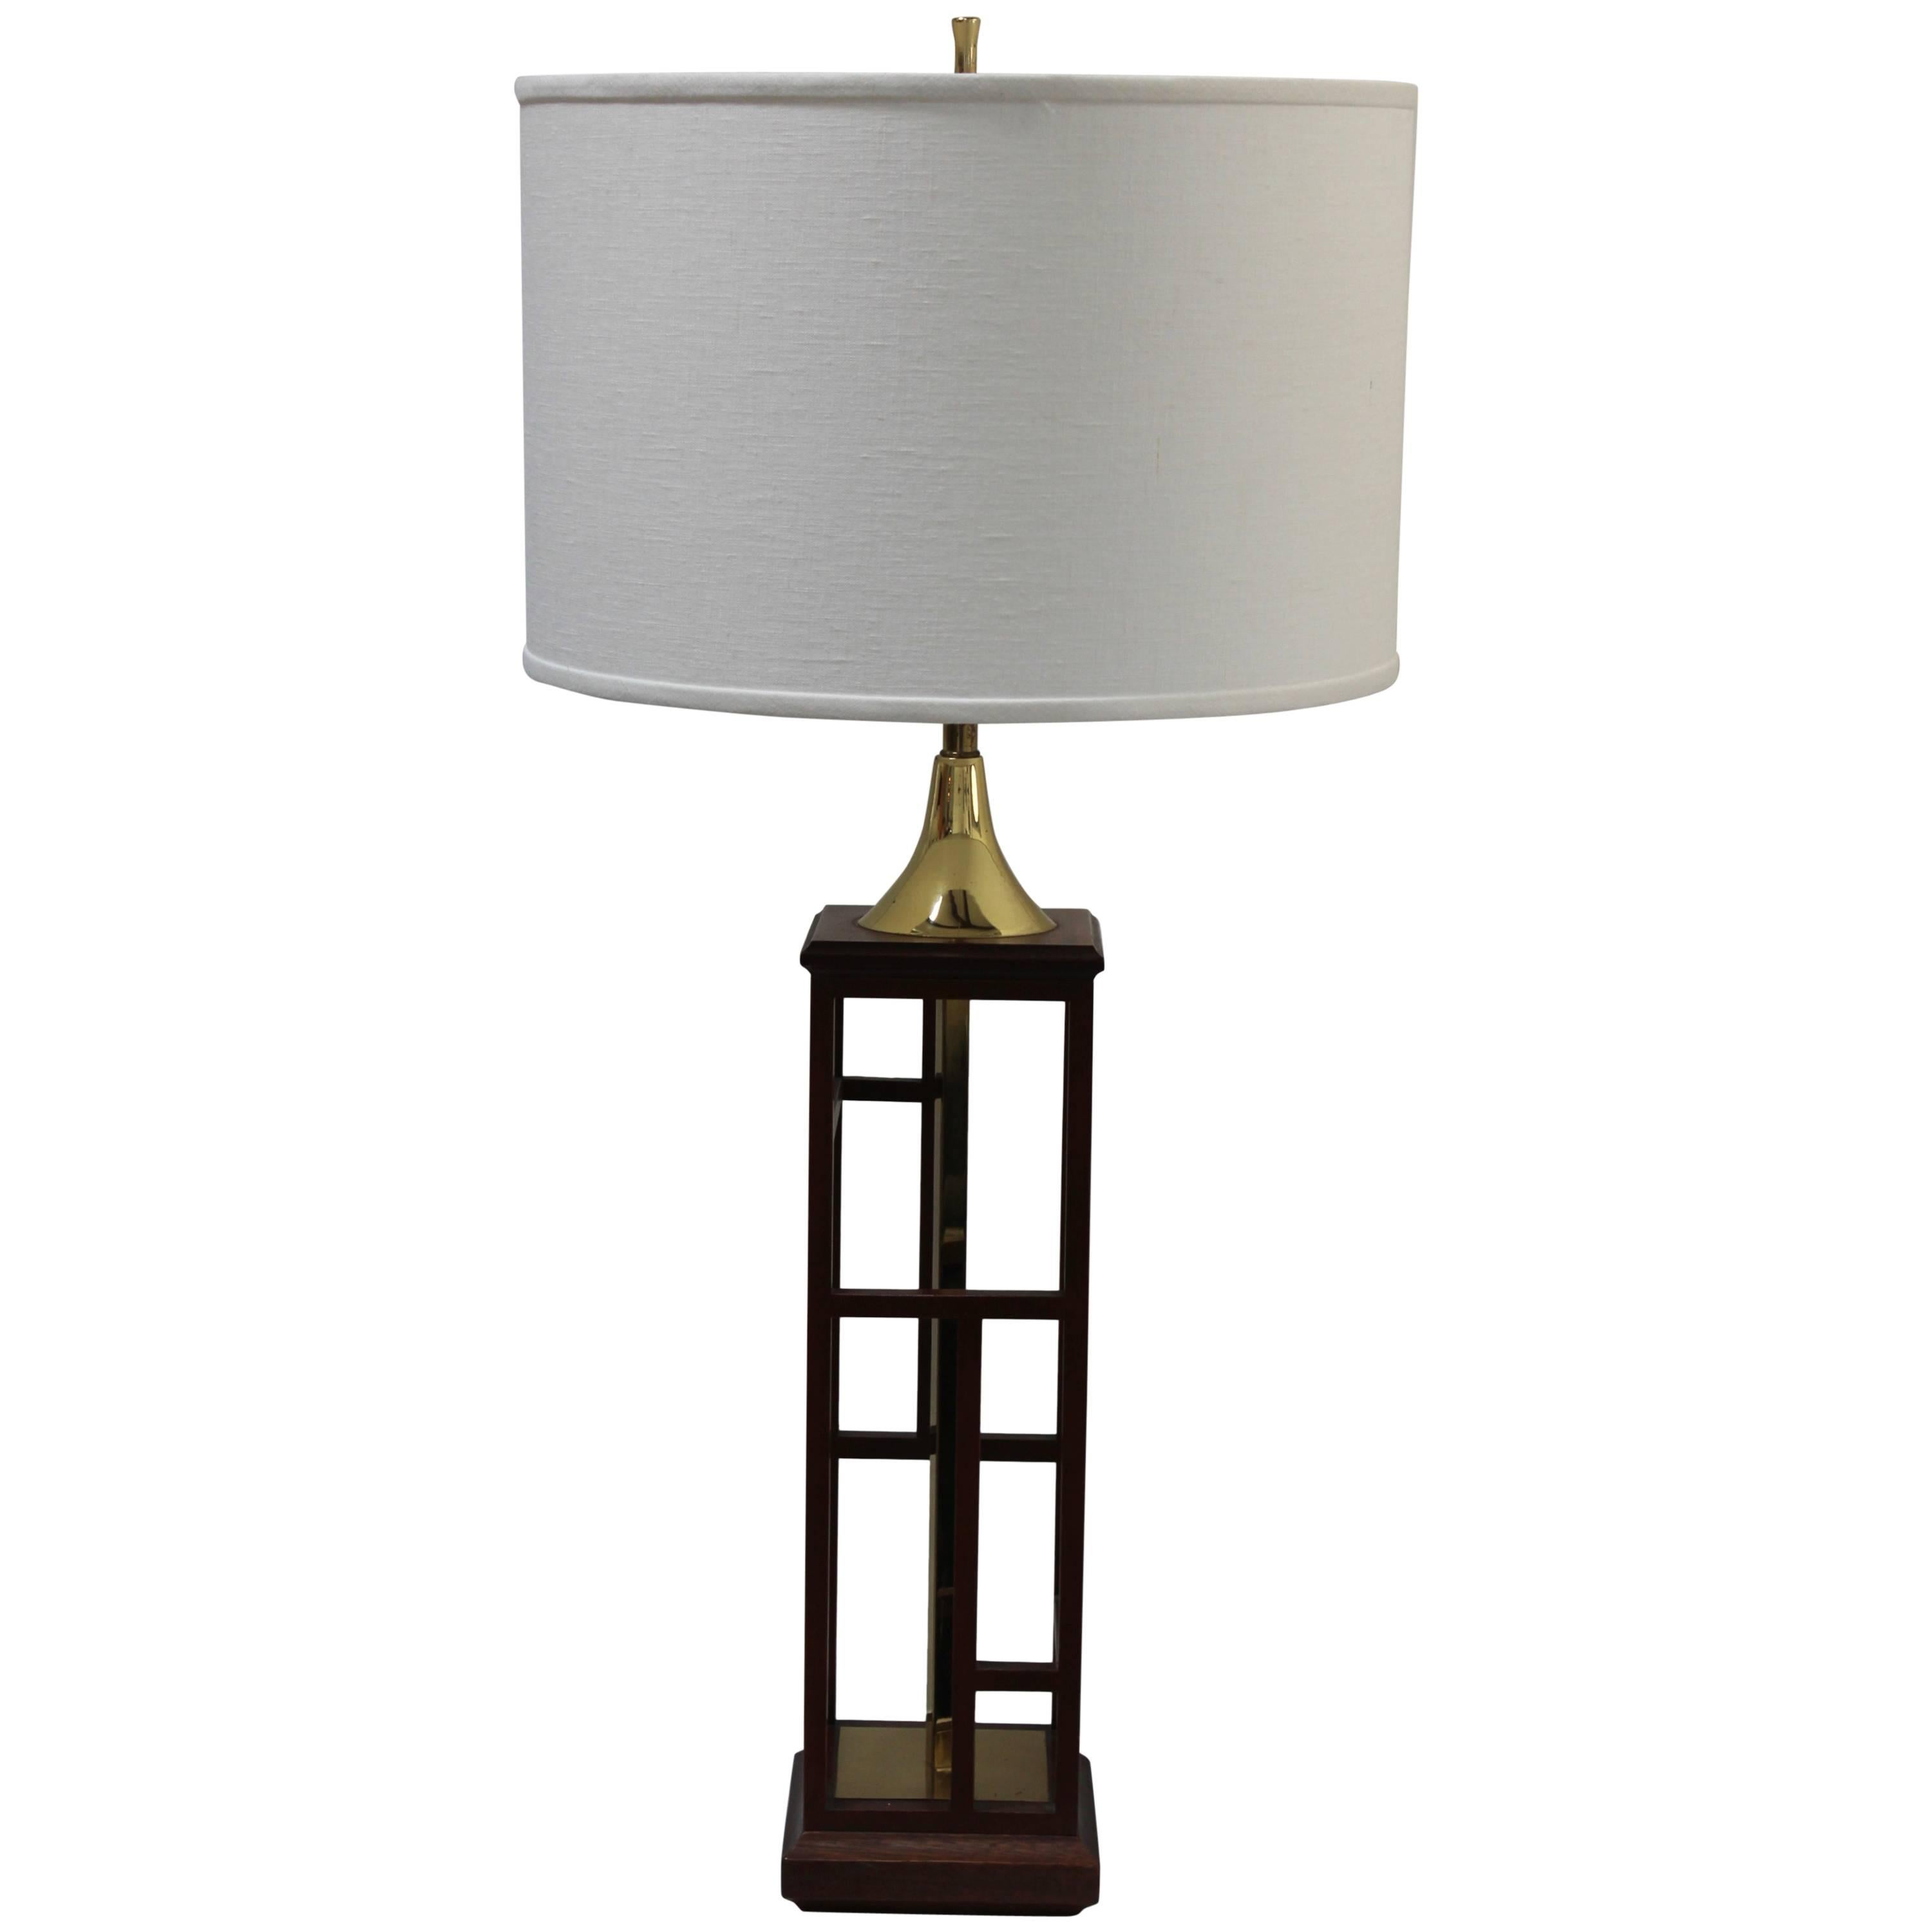 1960s Architectural Brass and Walnut Table Lamp